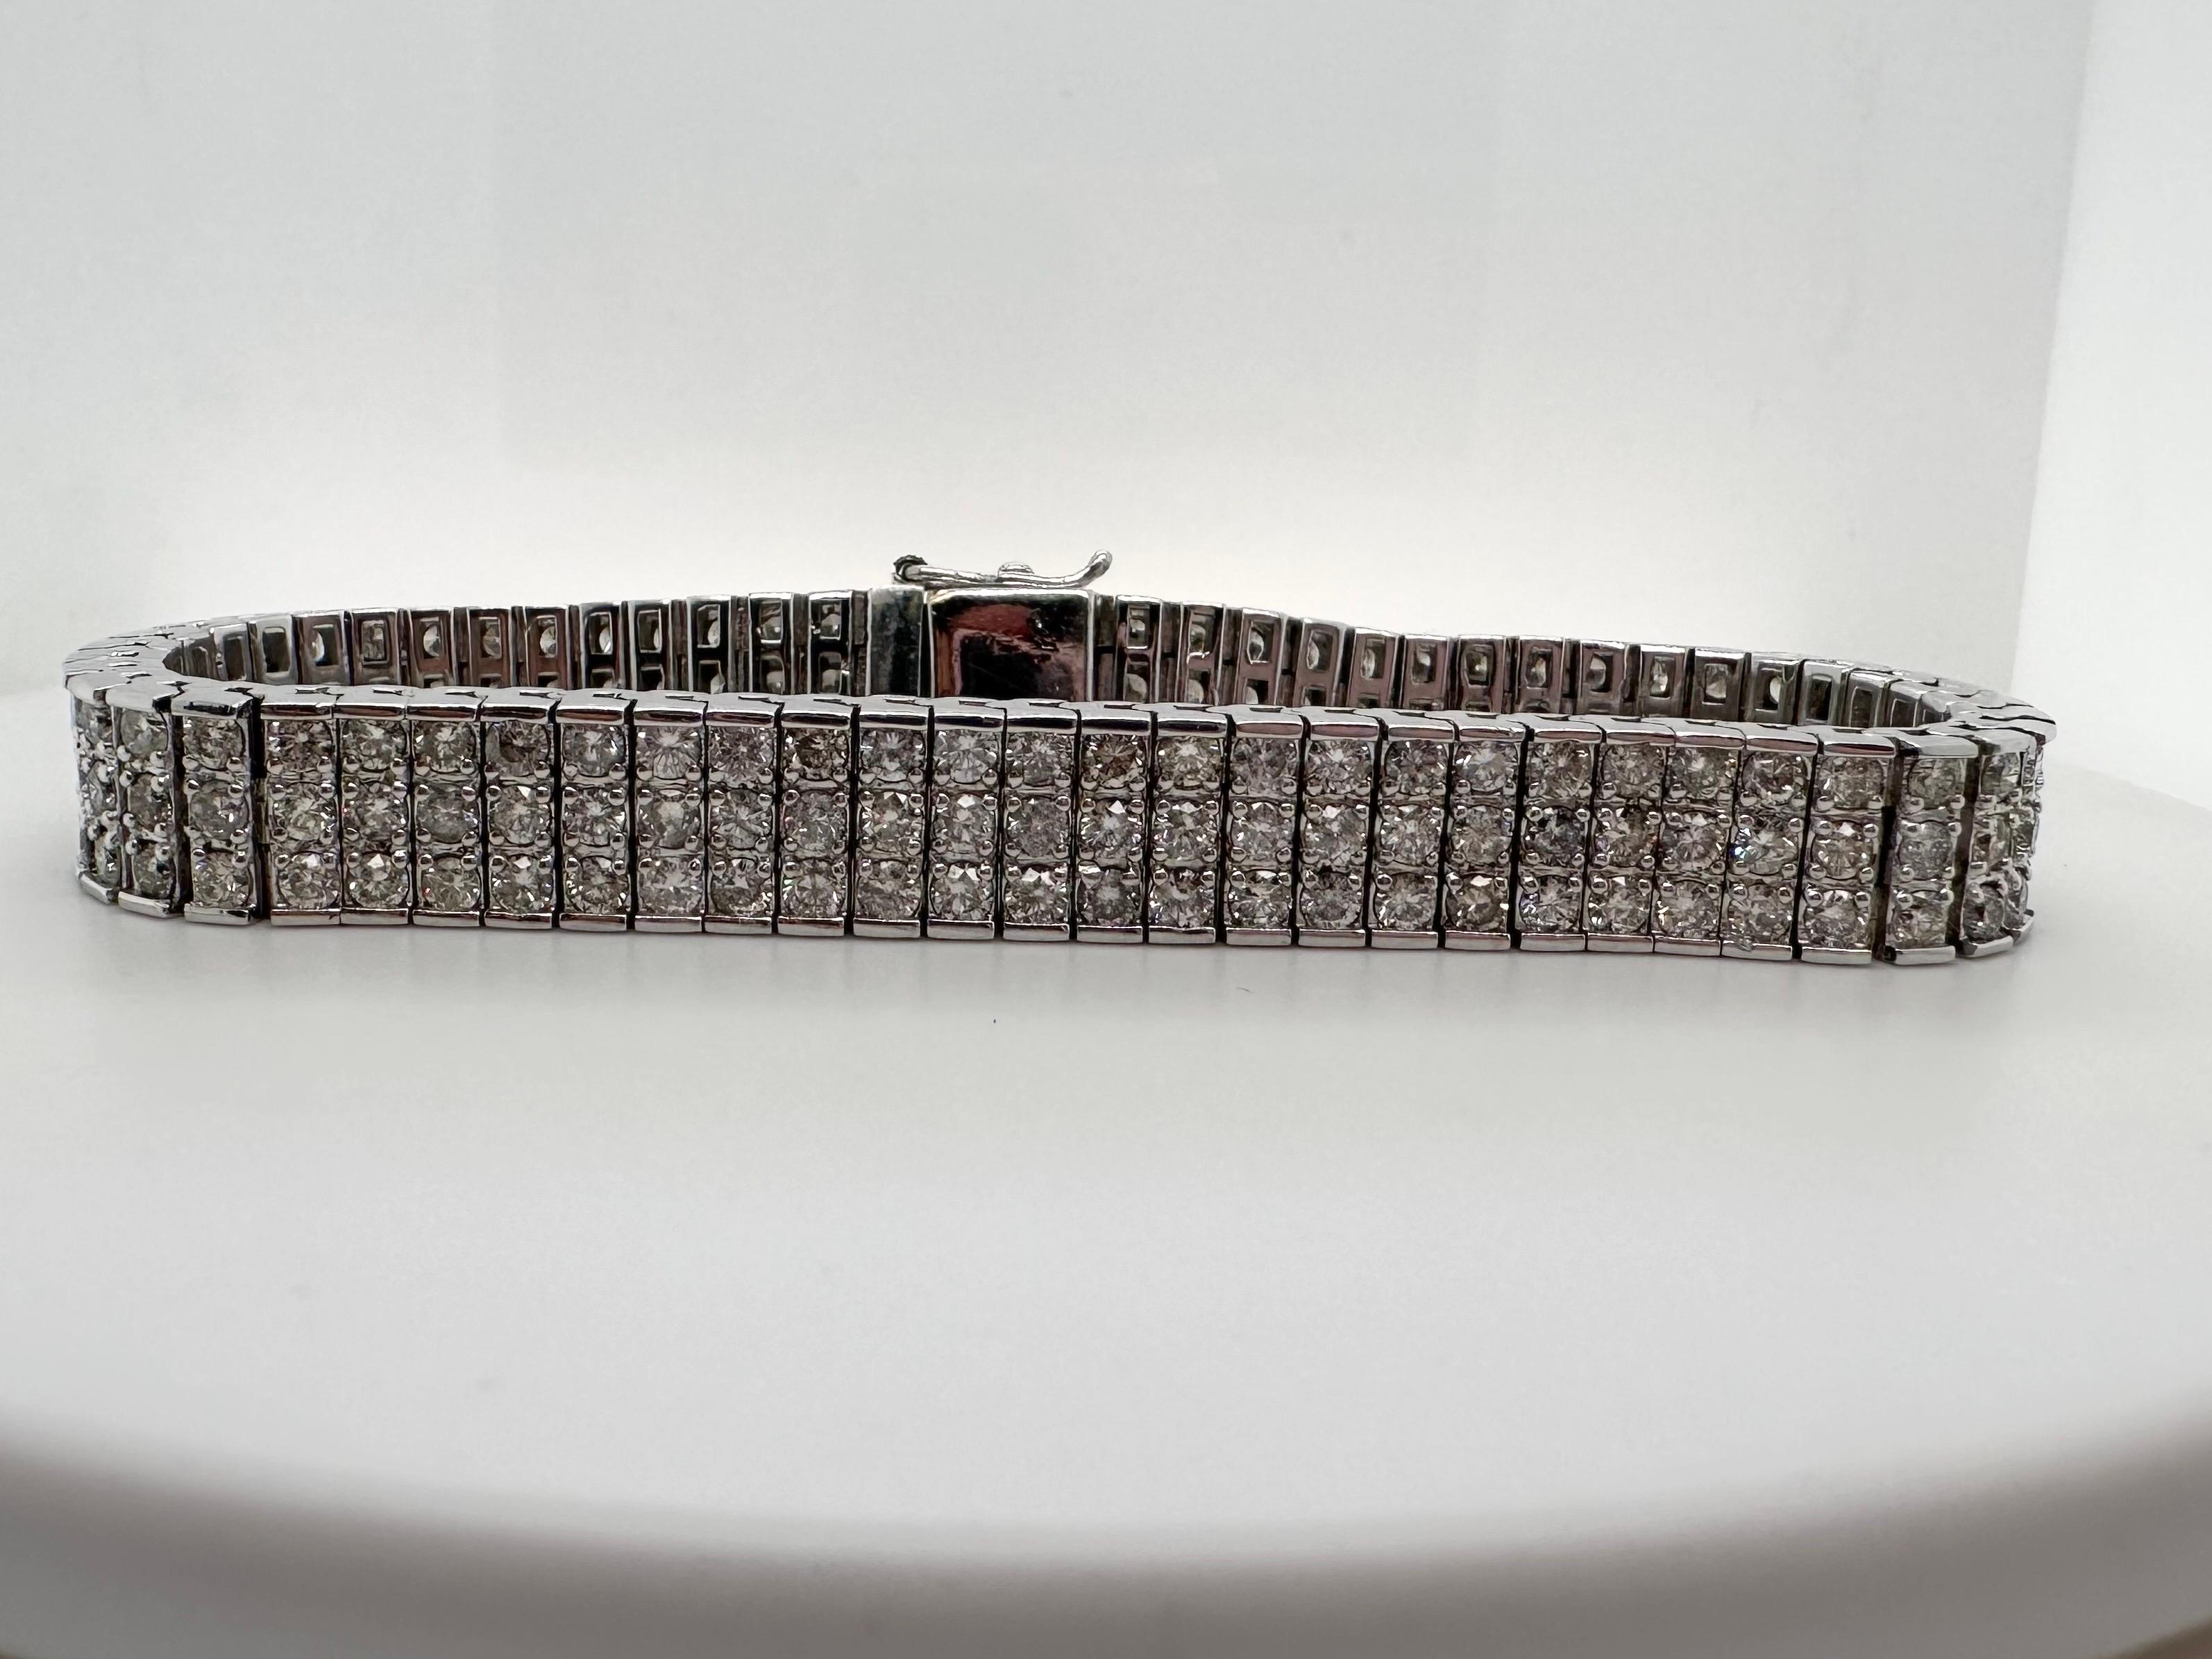 12 carats diamond bracelet-192 diamonds and 60 grams, diamonds are VS-SI clarity and F-G color, the bracelet is very comfortable with secure clasp, the handling time to ship the bracelet is 5-7 days depending on how long the certificate of